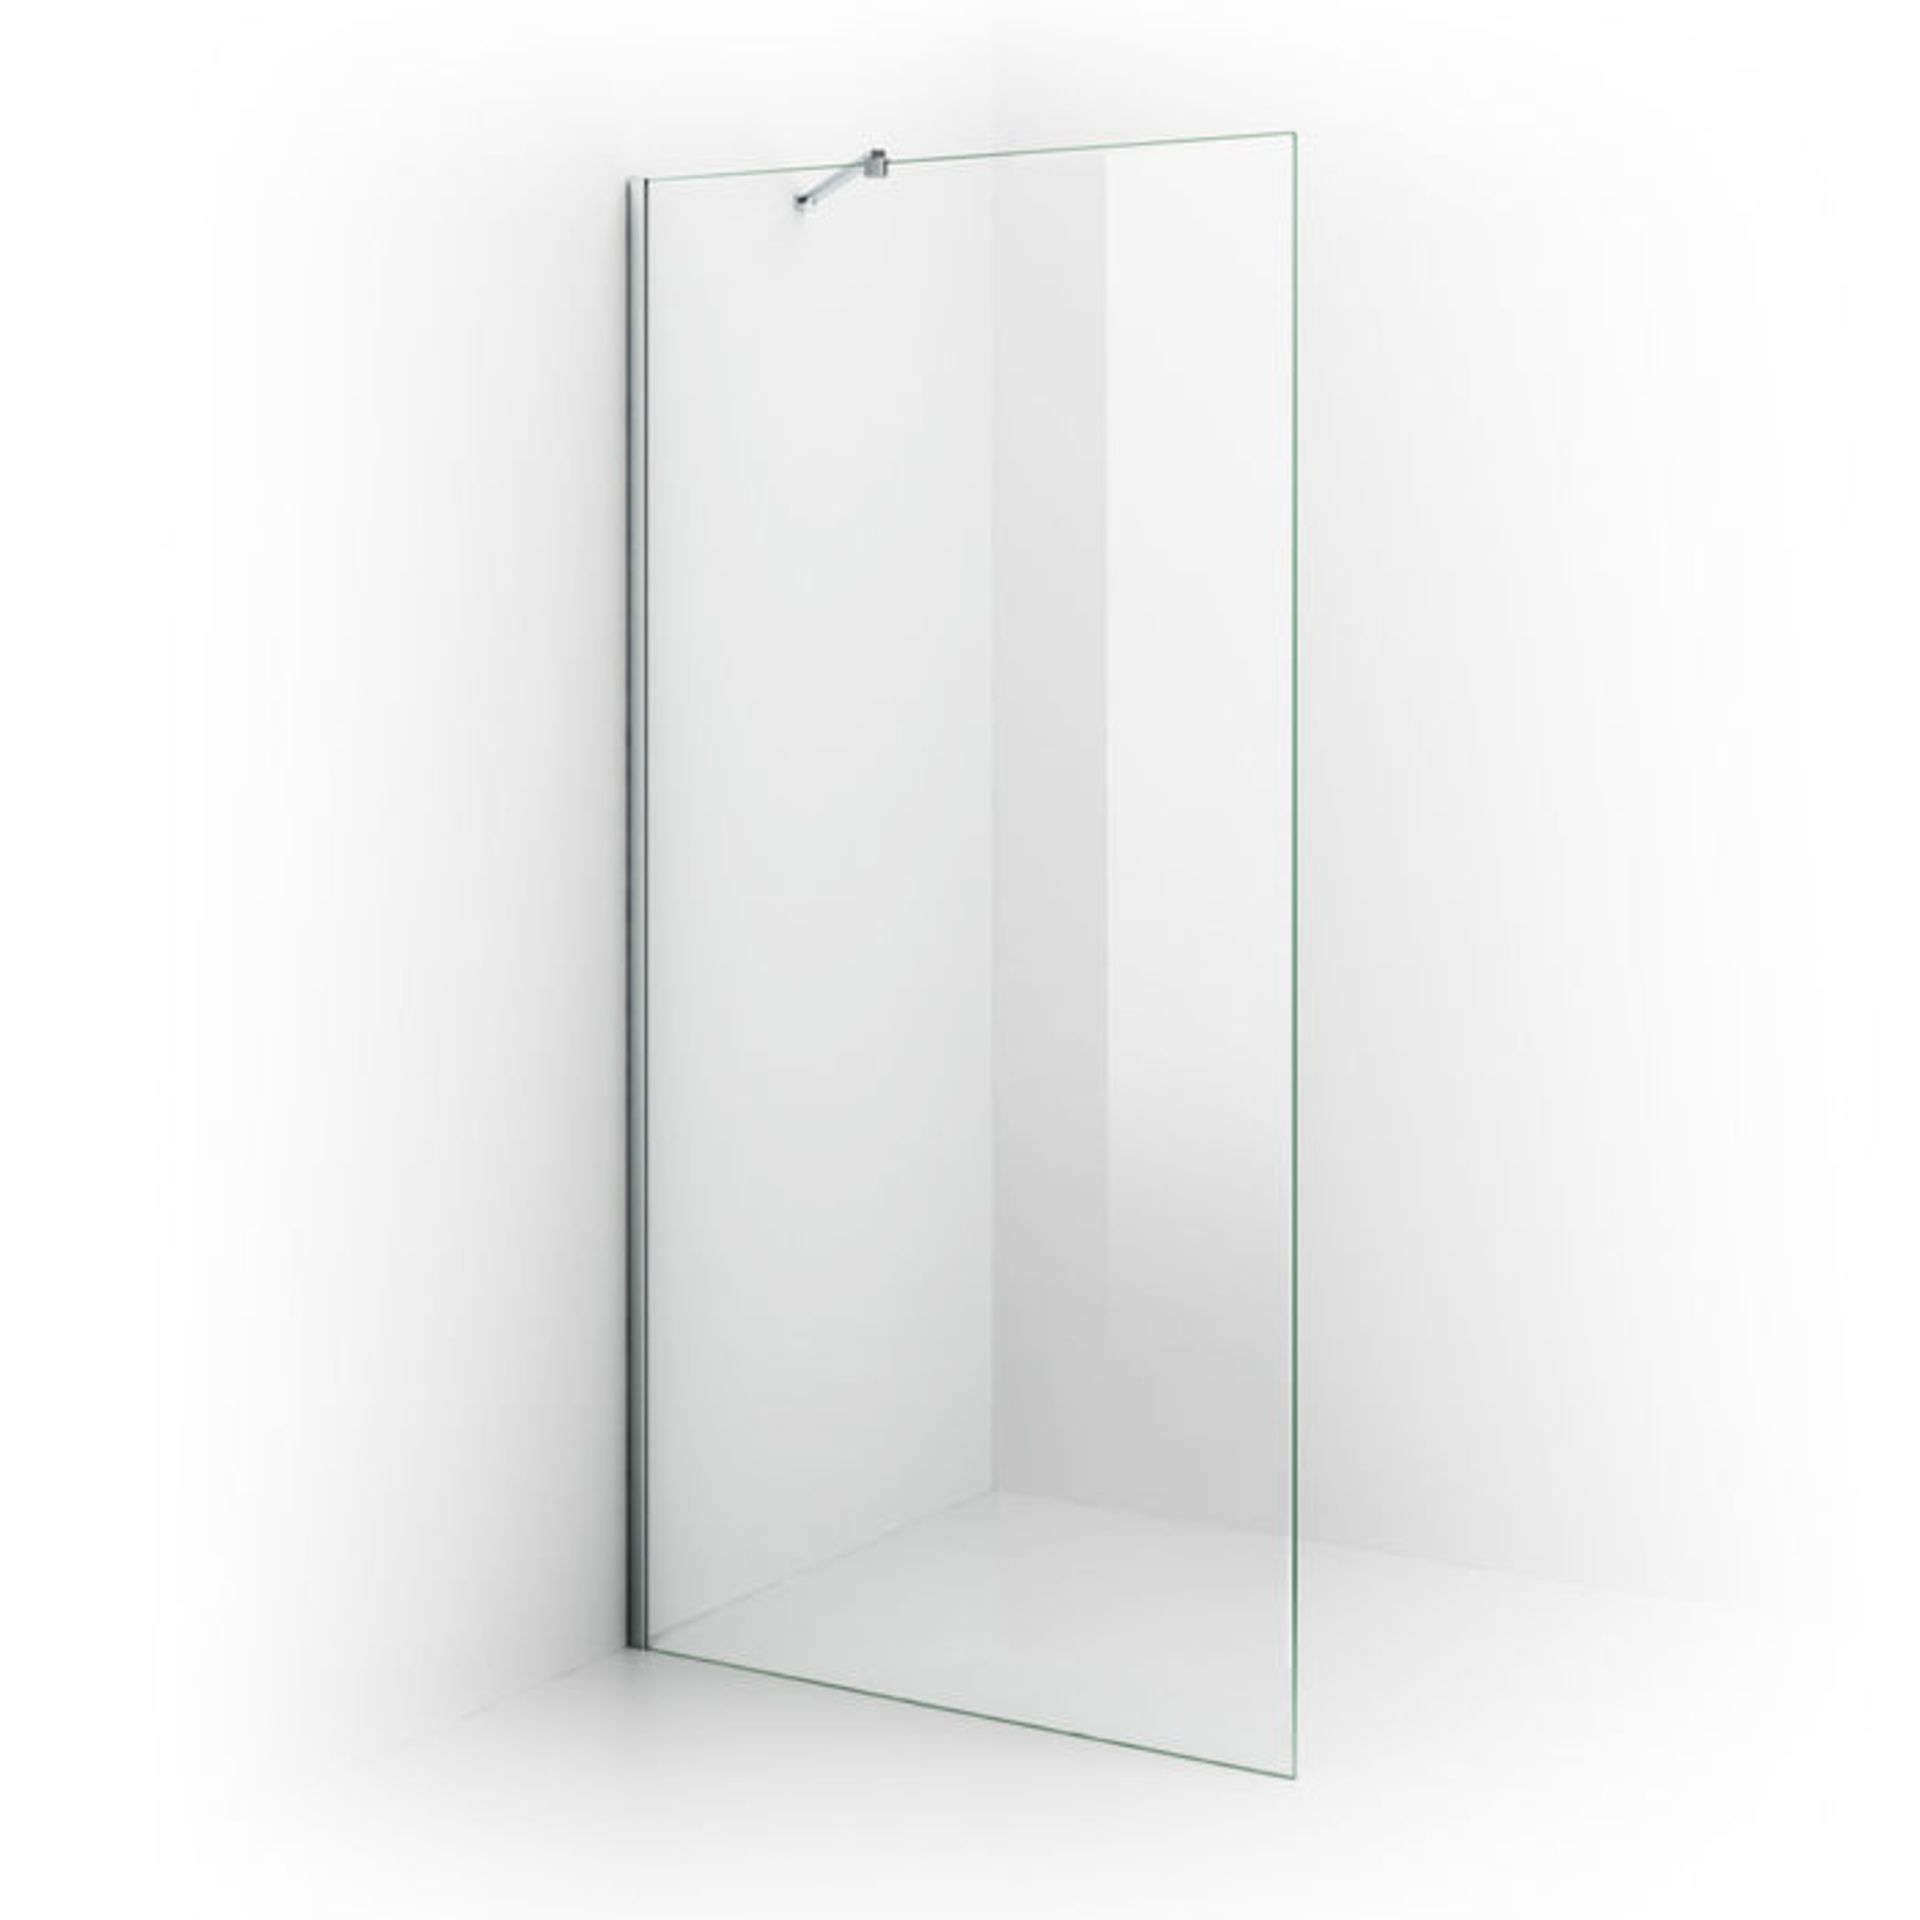 (MT214) 1400mm - 8mm - Premium EasyClean Wetroom Panel. RRP £549.99. 8mm EasyClean glass - Our glass - Image 4 of 4